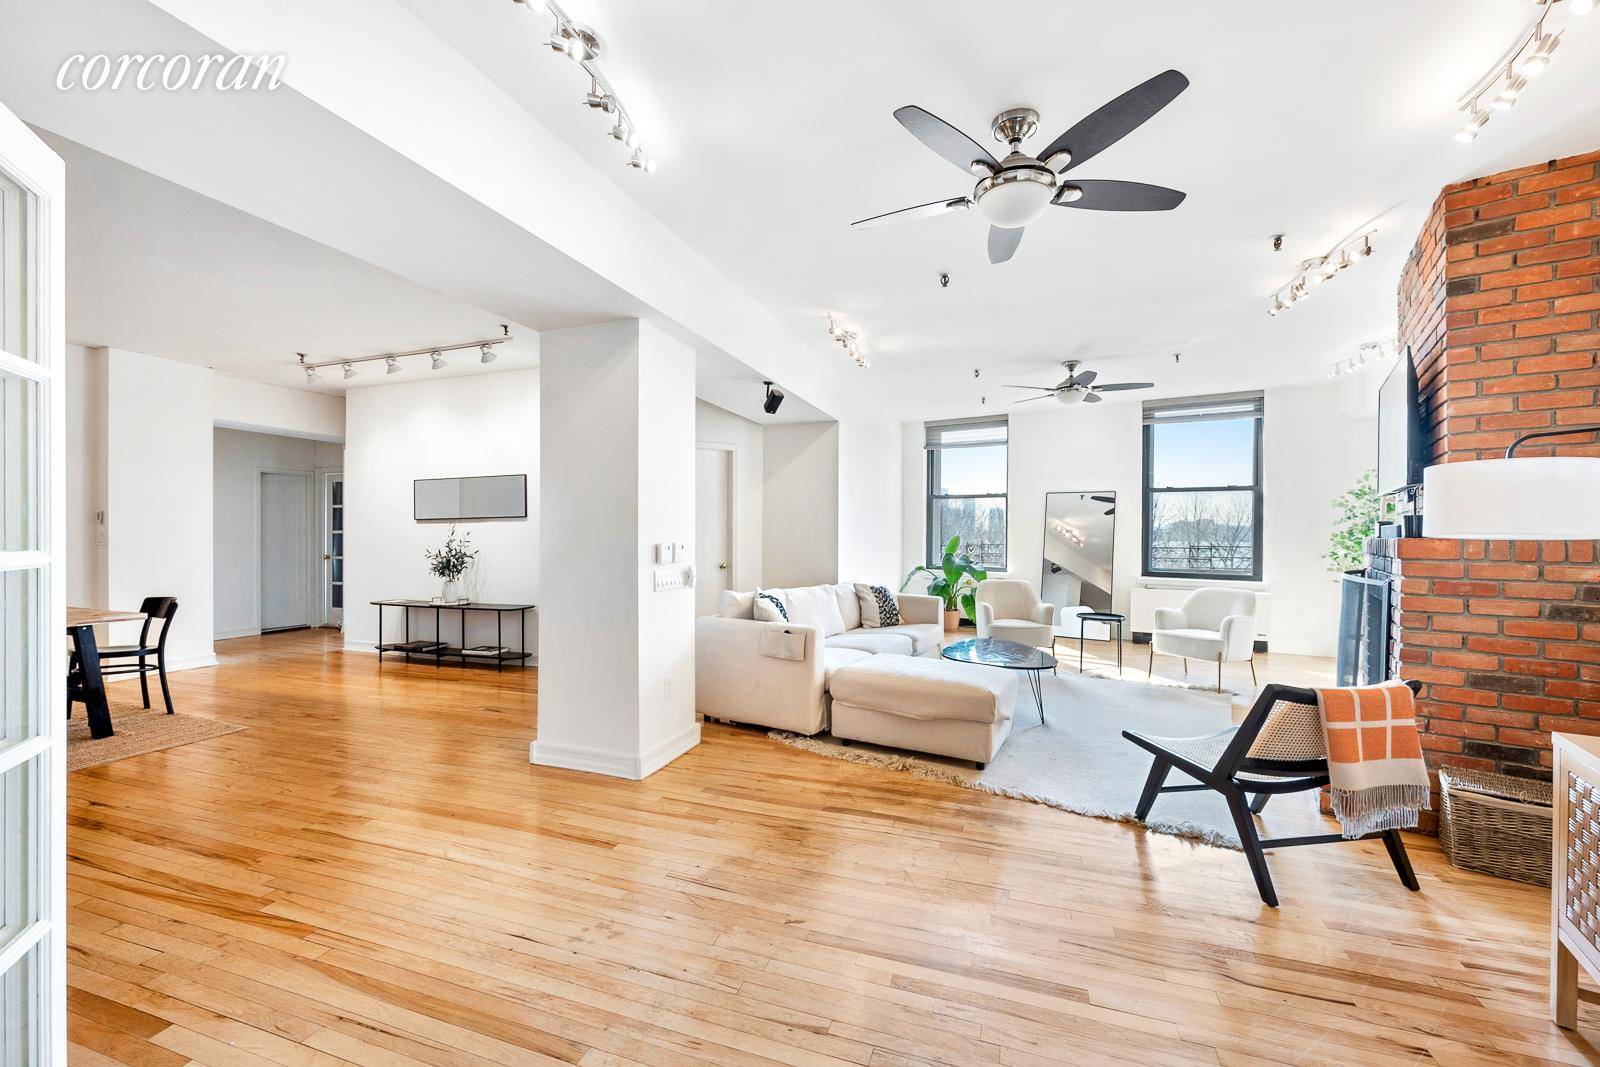 Enjoy Hudson River sunsets in this sprawling 2, 200sf, 3 bed, 2 bath Pre War loft in the heart of the cobblestone West Village.